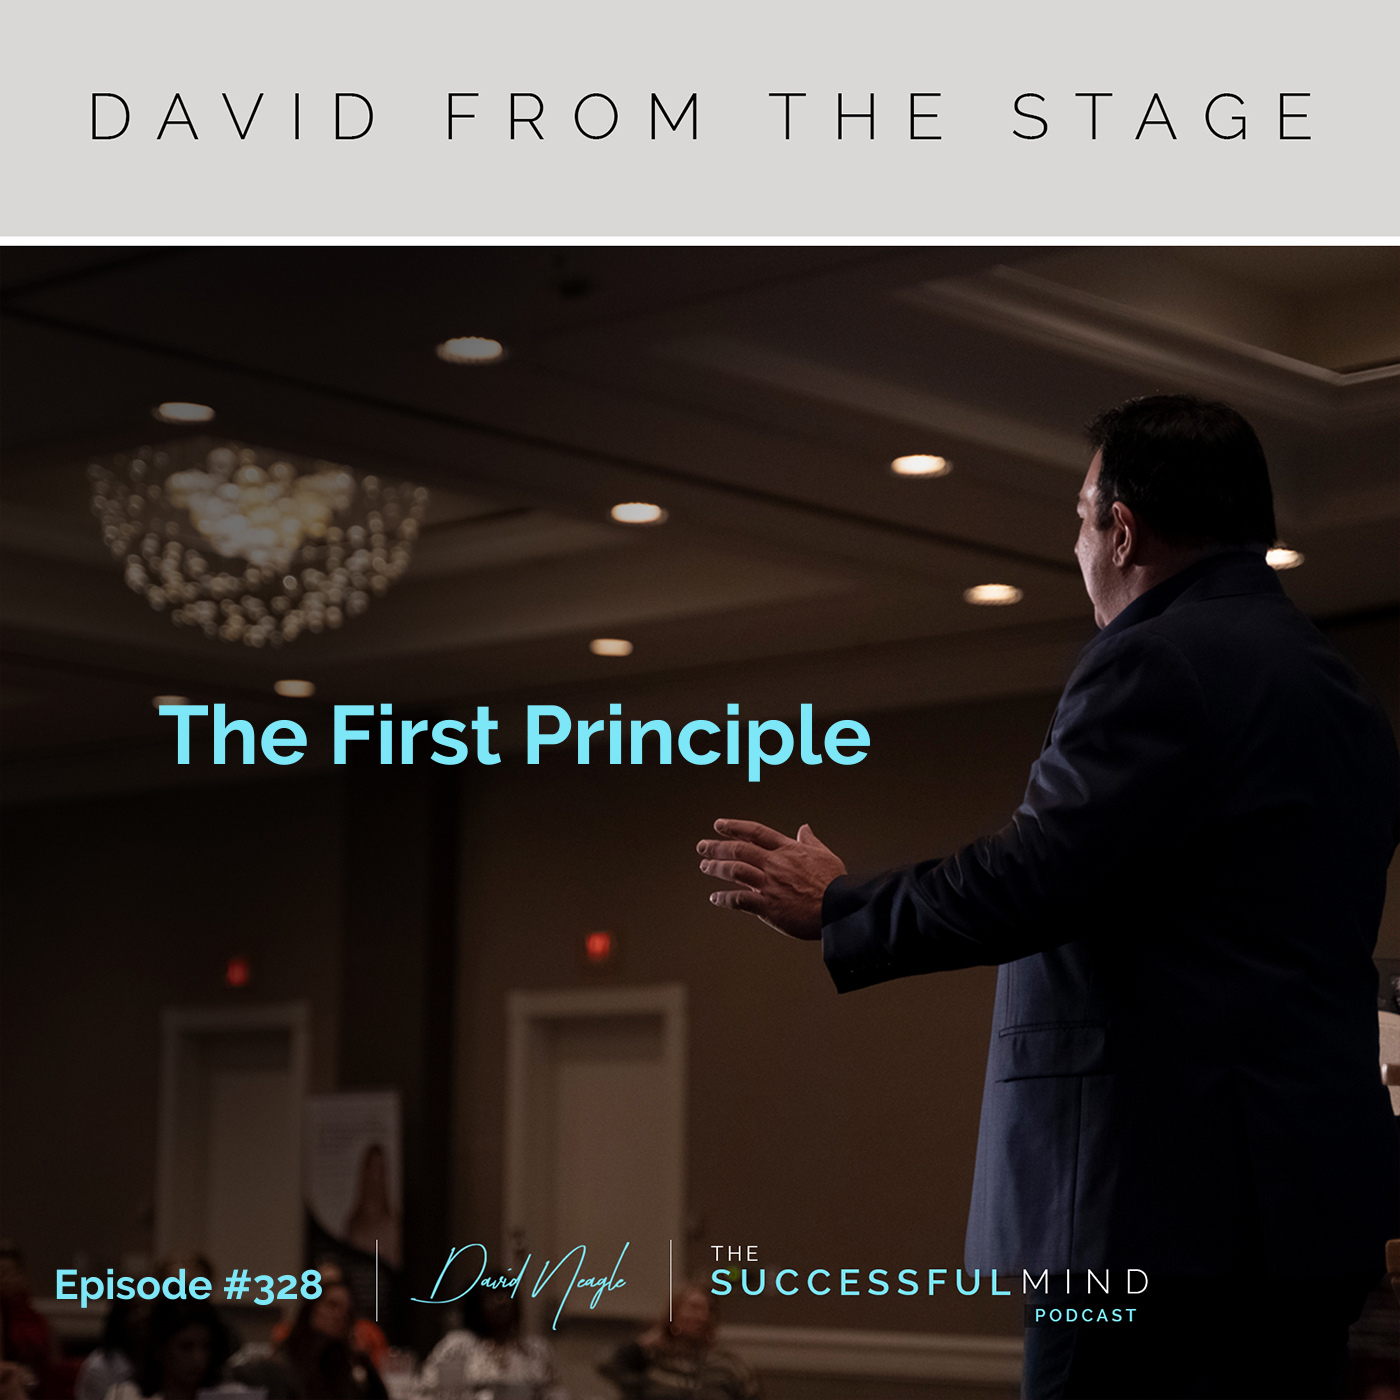 The Successful Mind Podcast - Episode 328 - The First Principle